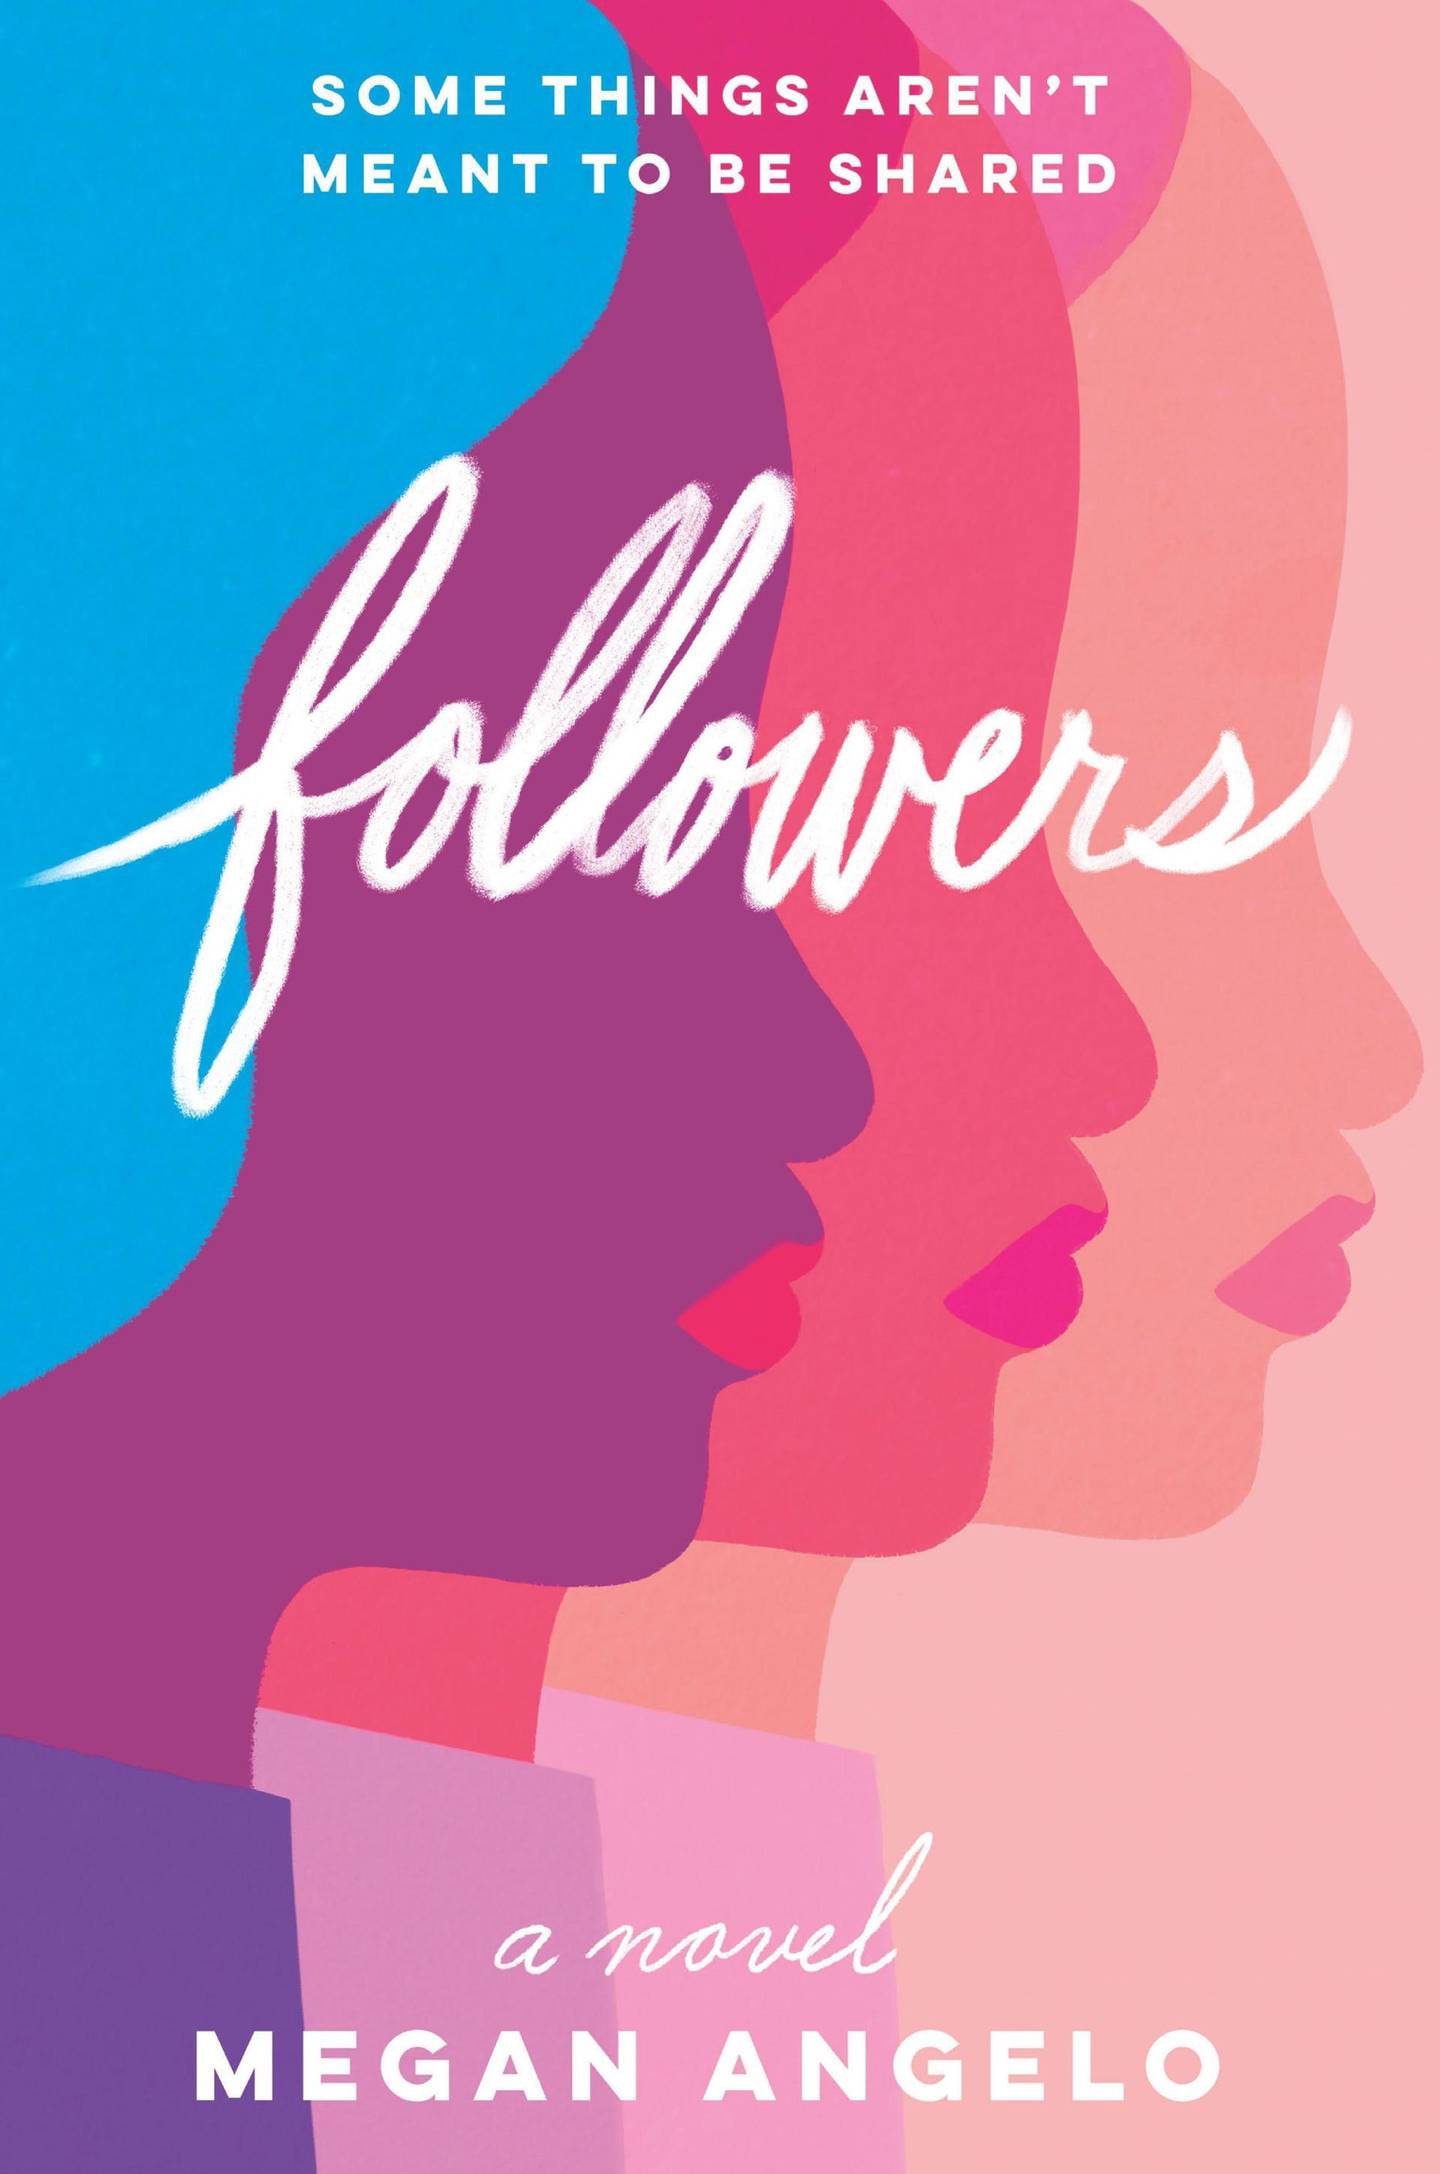 Followers by Megan Angelo published by Graydon House. Courtesy Harlequin Enterprises